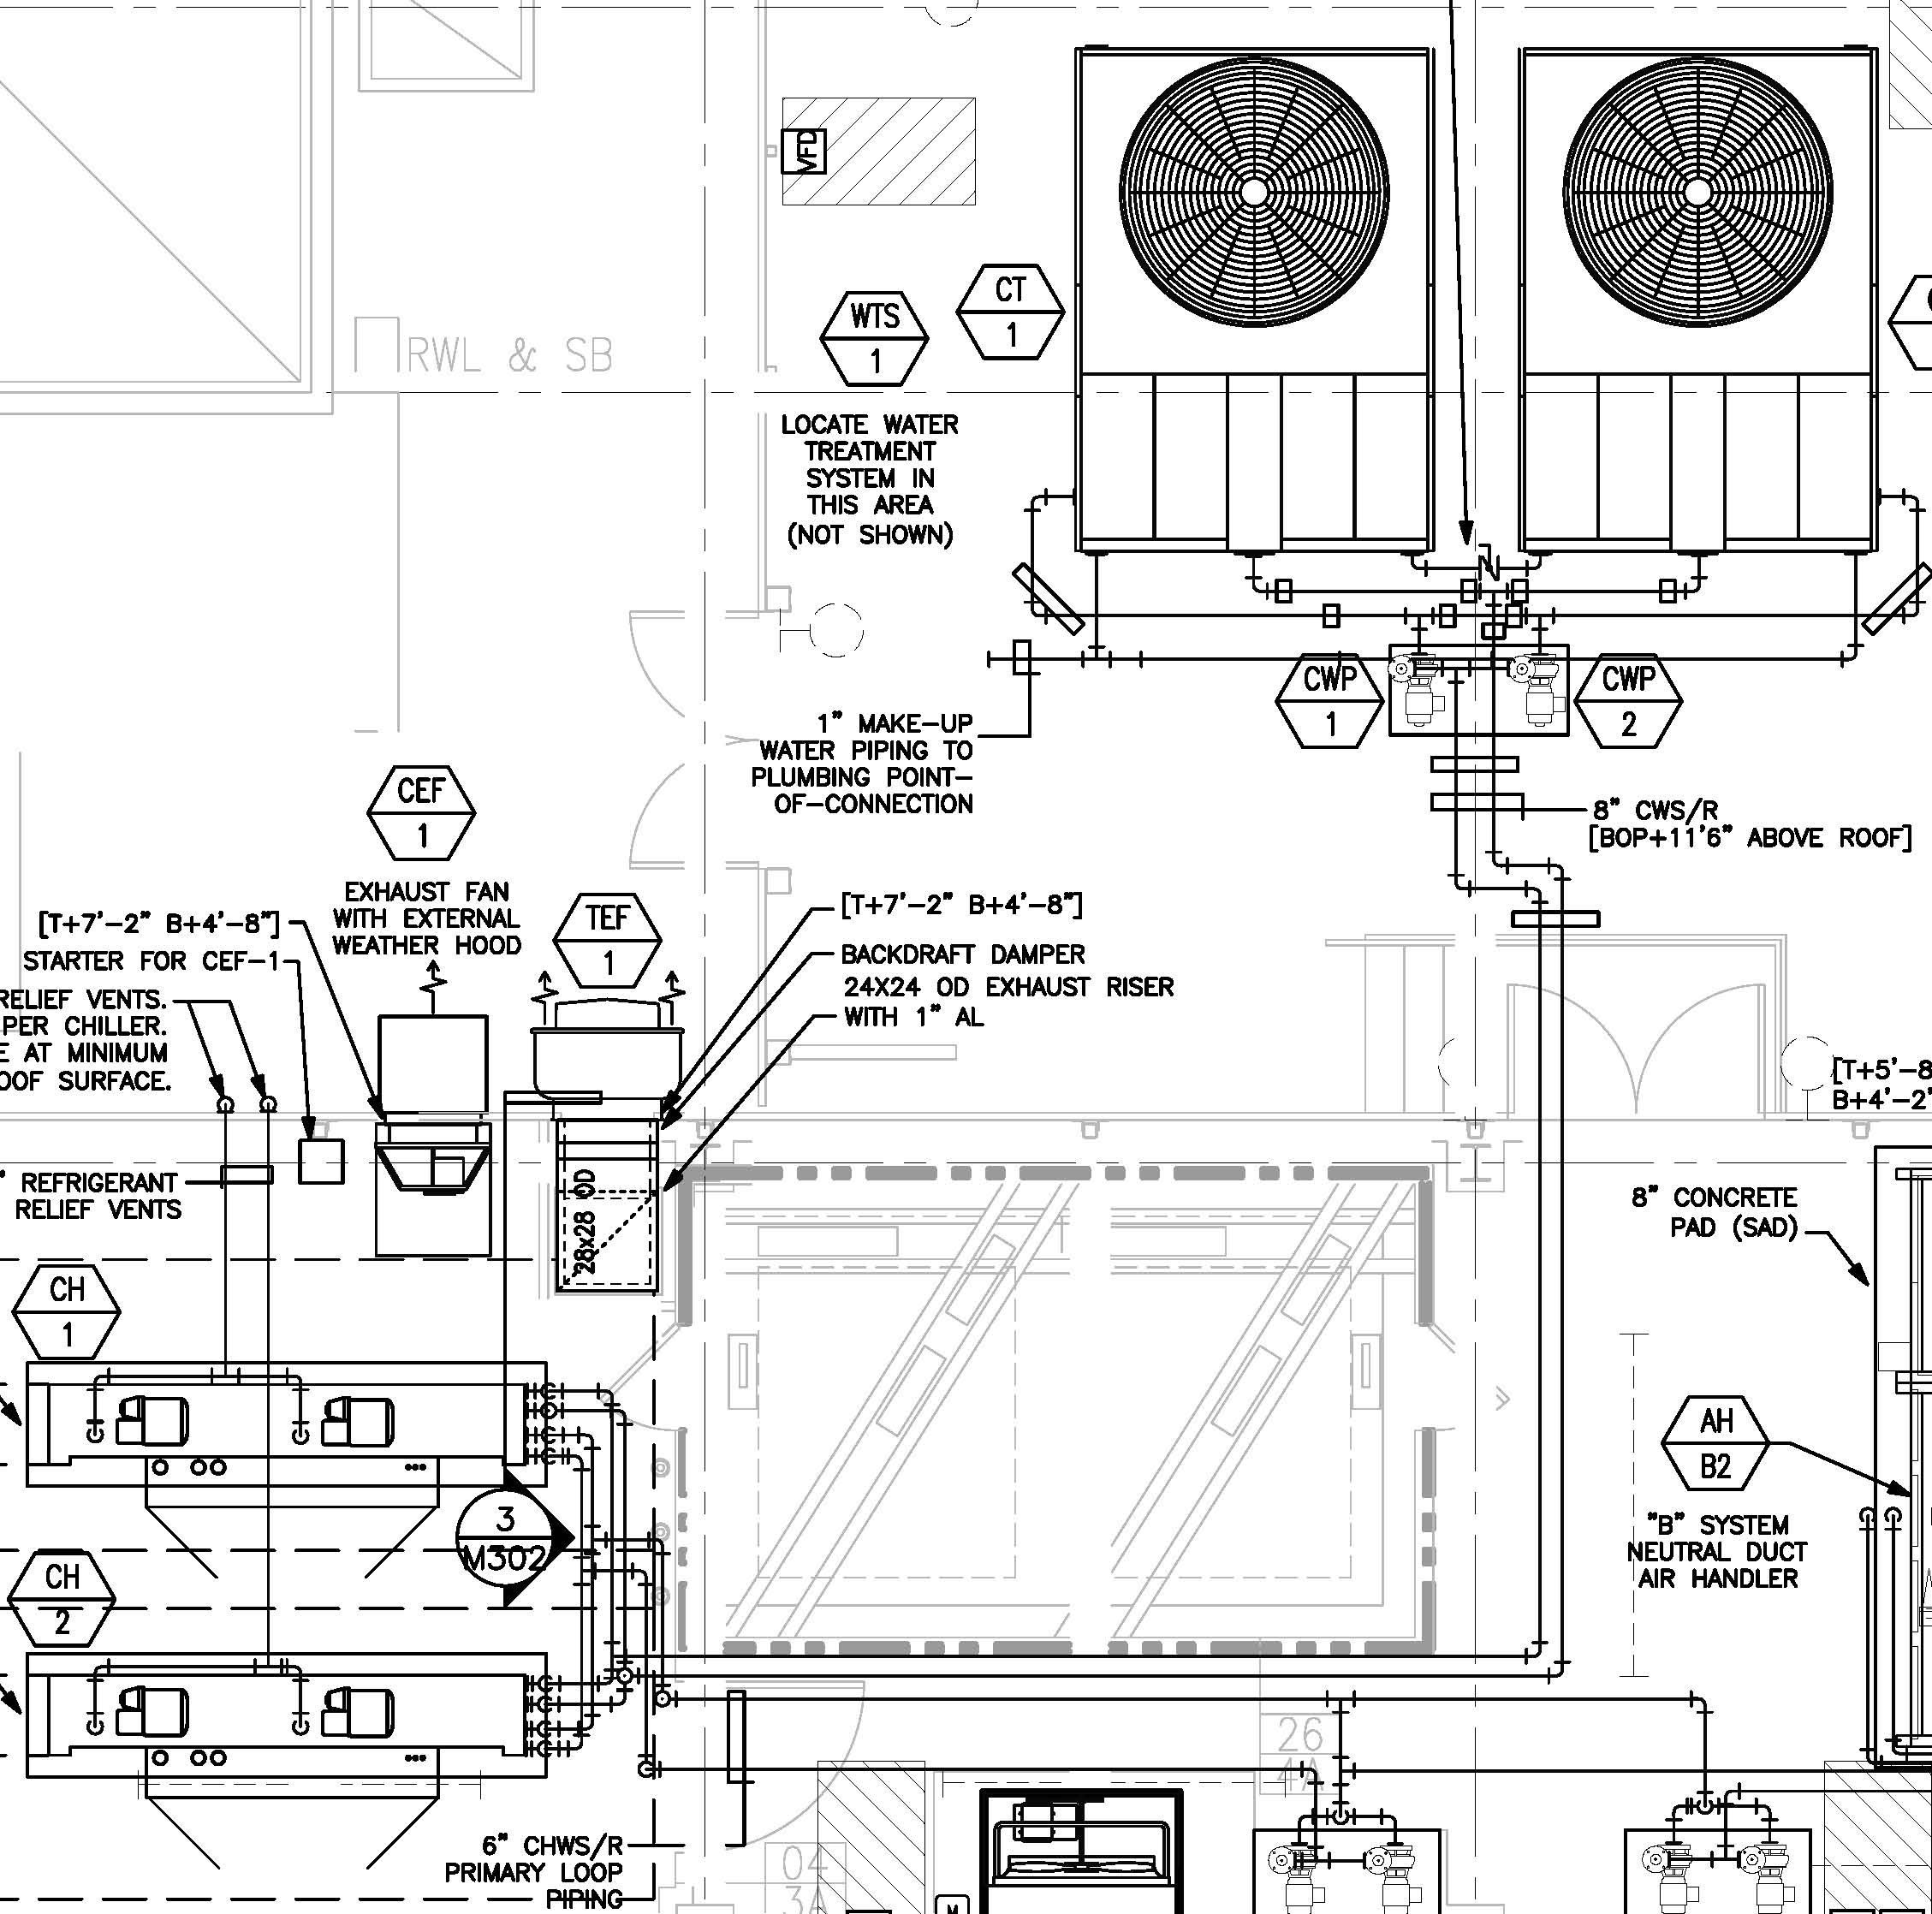 First pany Air Handler Wiring Diagram Simple Air Conditioner Wiring Diagram Picture Download